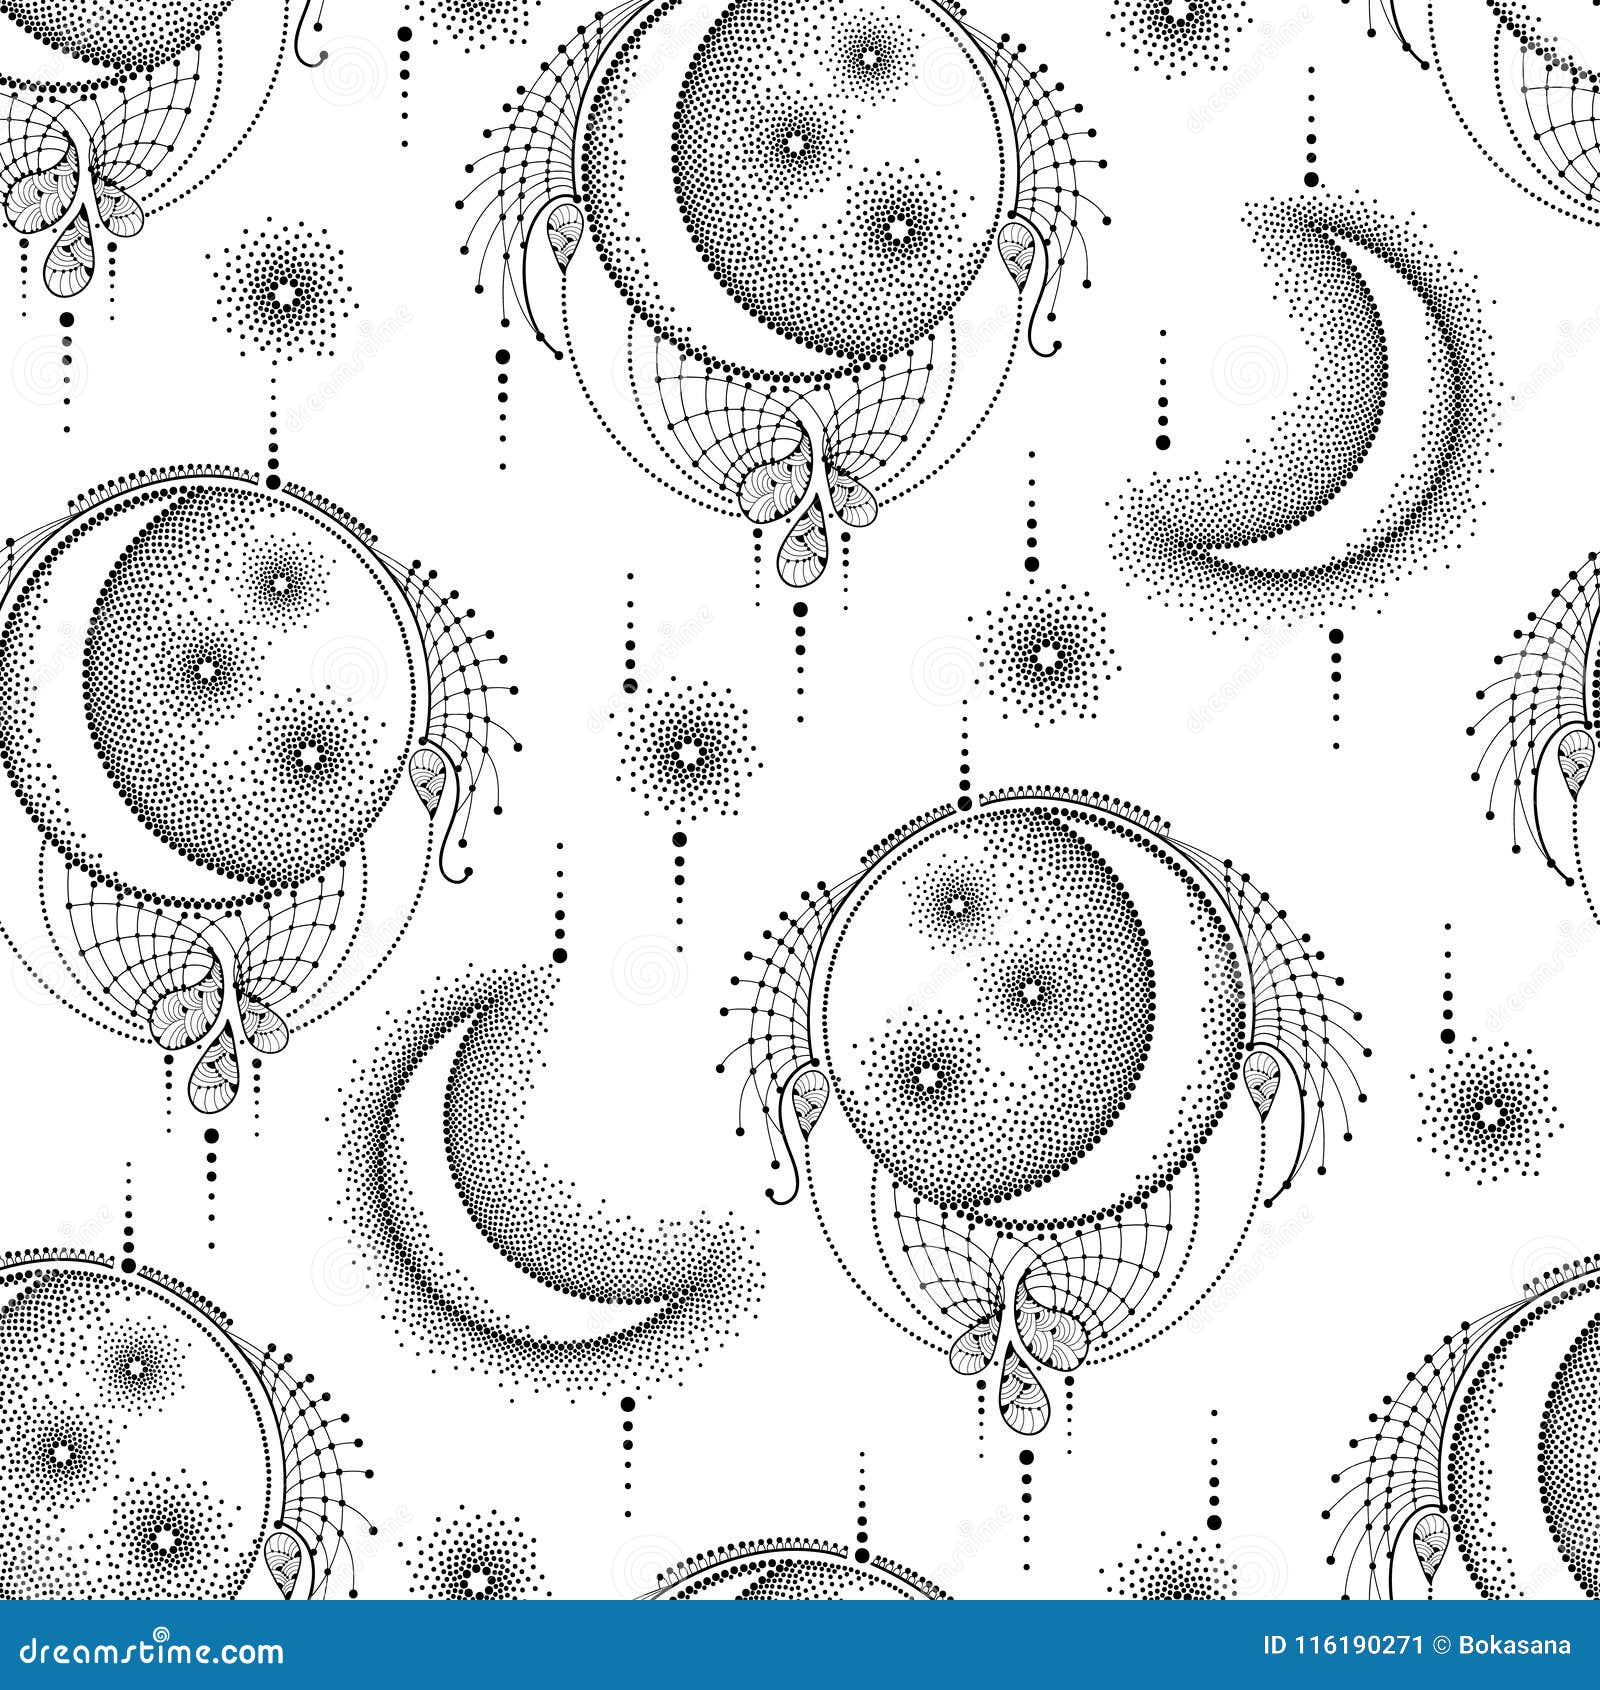 Vector Seamless Pattern With Dotted Half Moon Star And Ornate